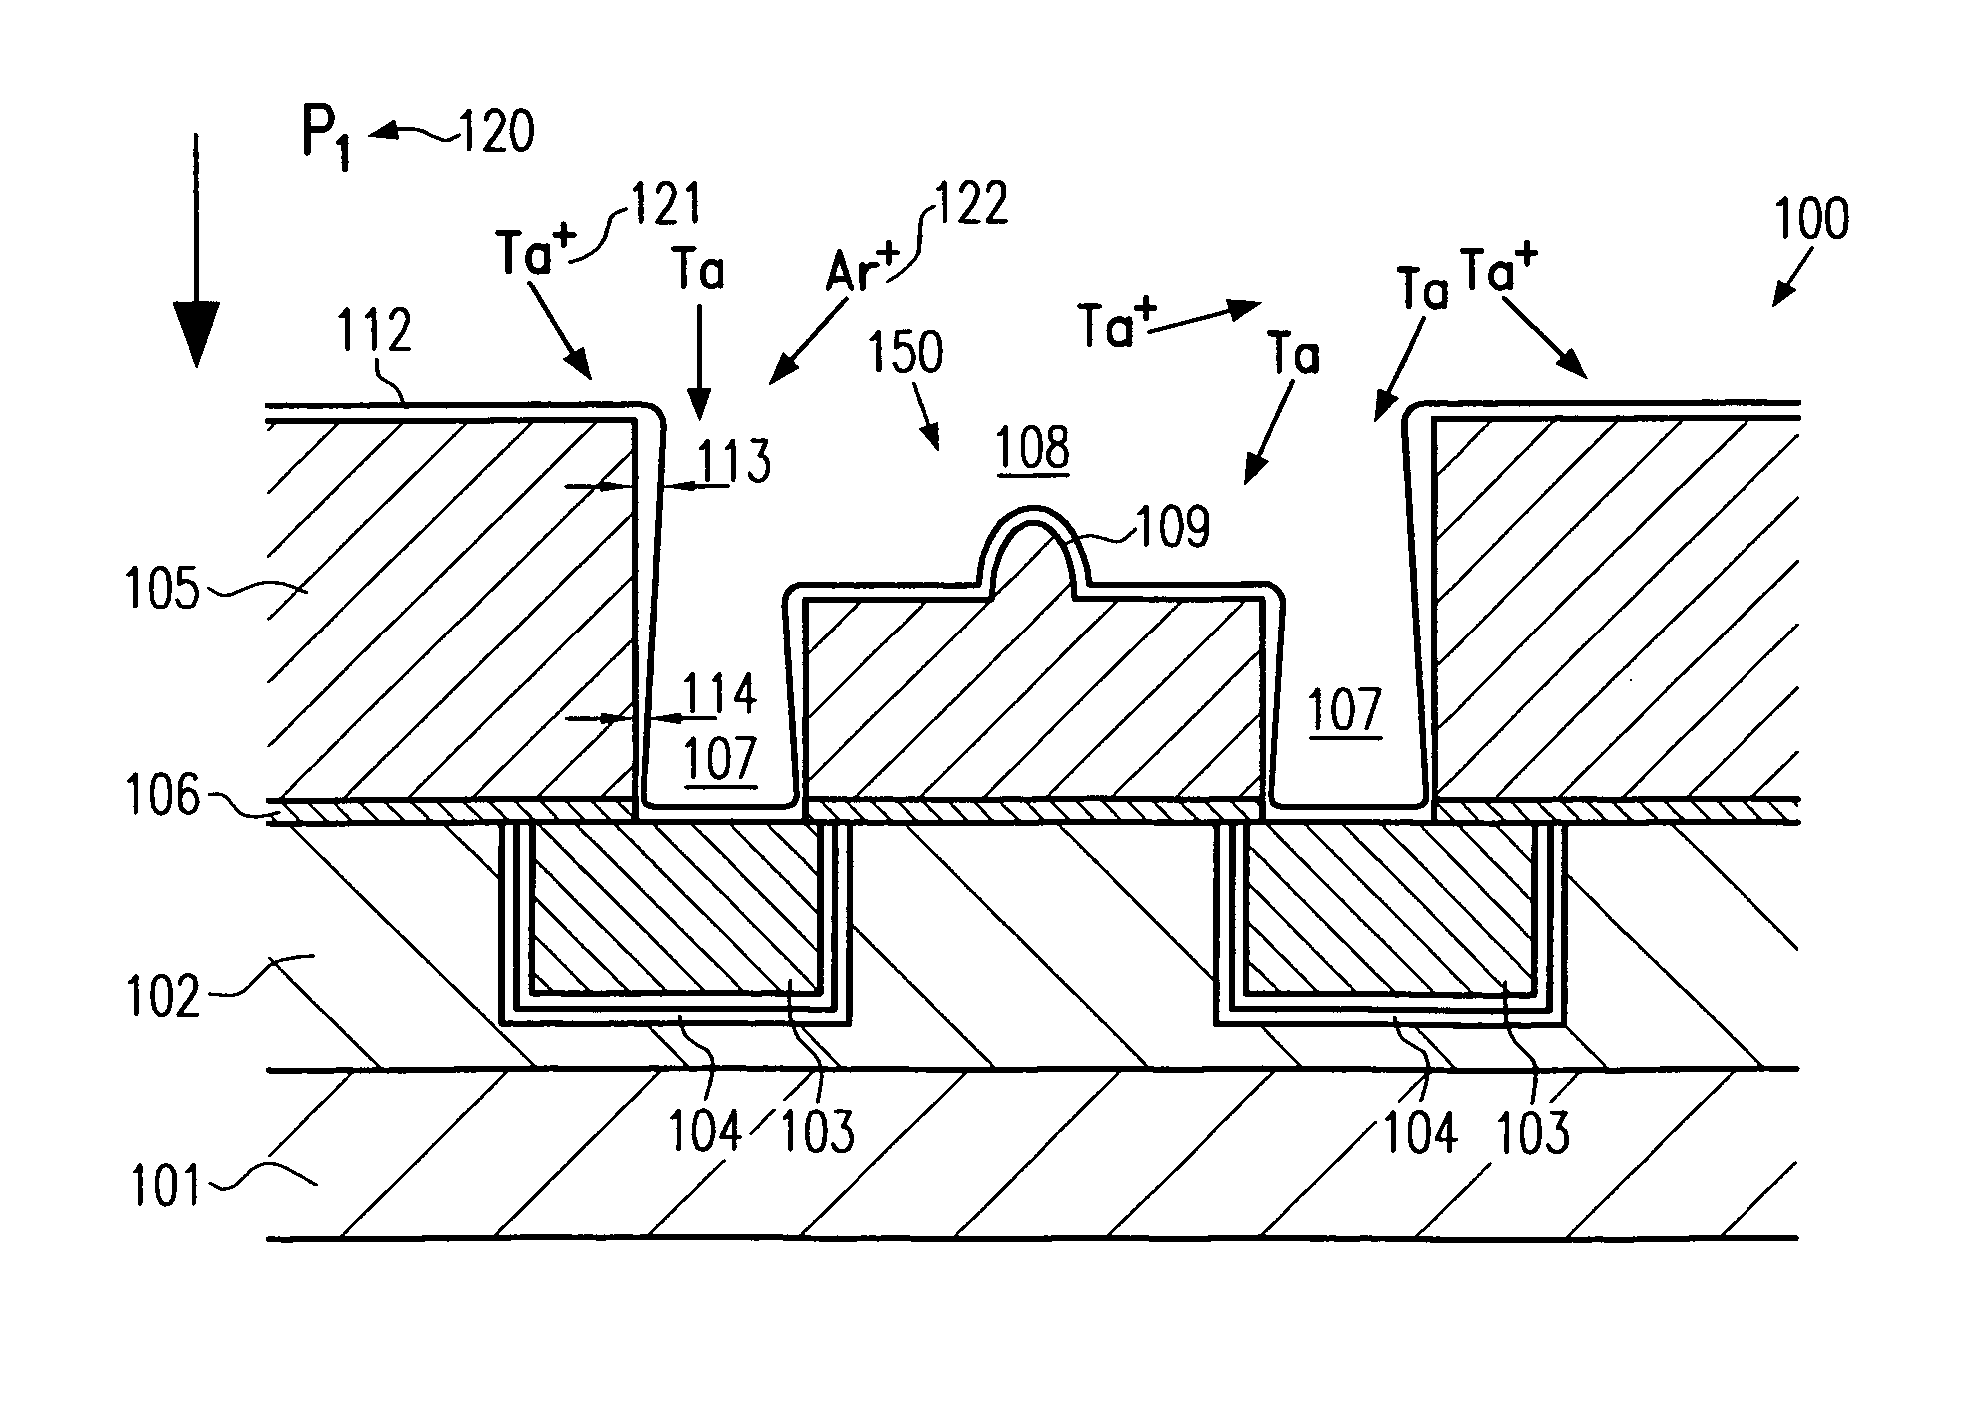 Method of forming a conductive barrier layer within critical openings by a final deposition step after a re-sputter deposition